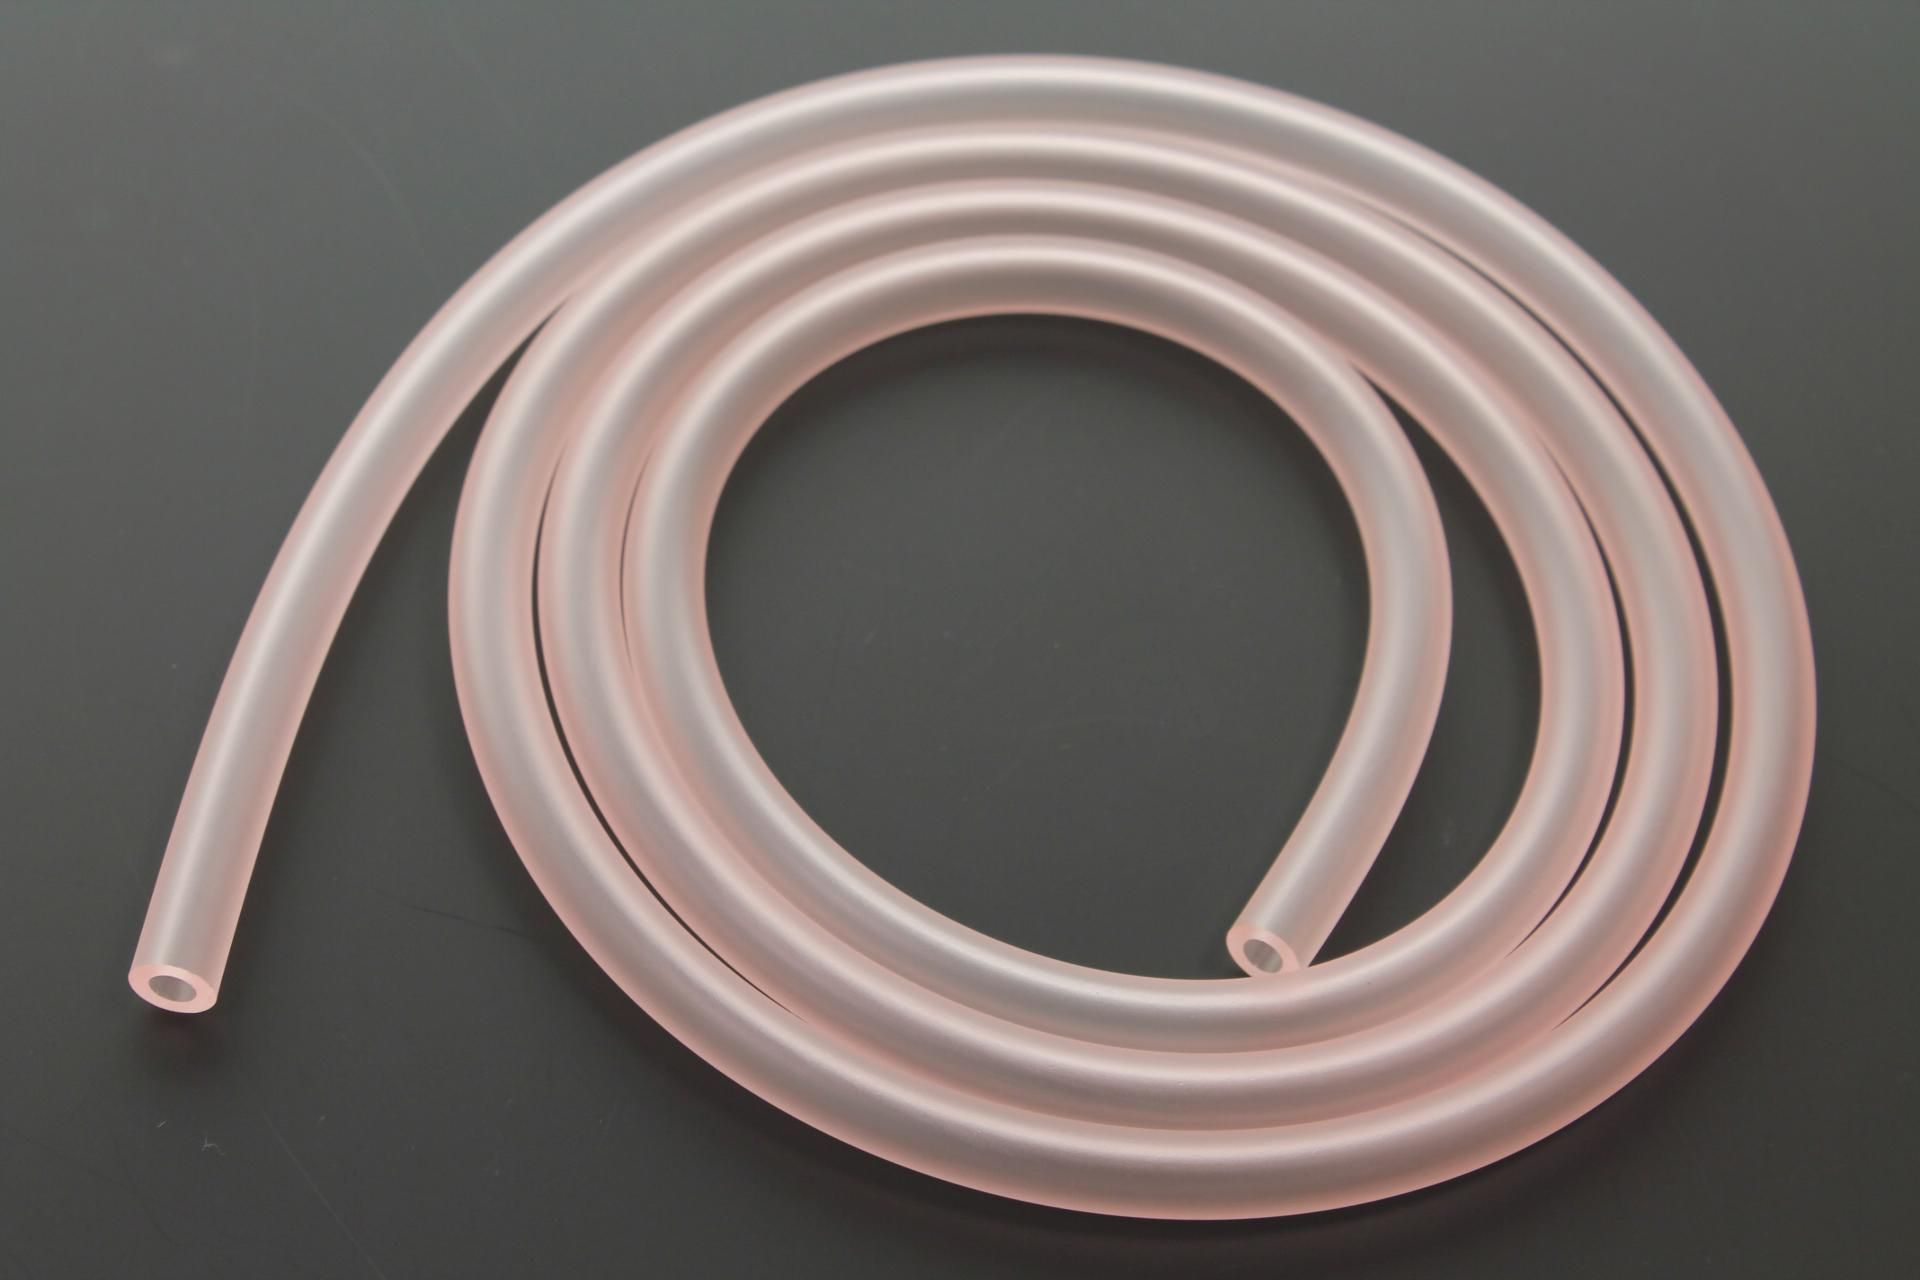 90446-09217-00 Superseded by 91A20-05145-00 - TUBE, FLEXIBLE